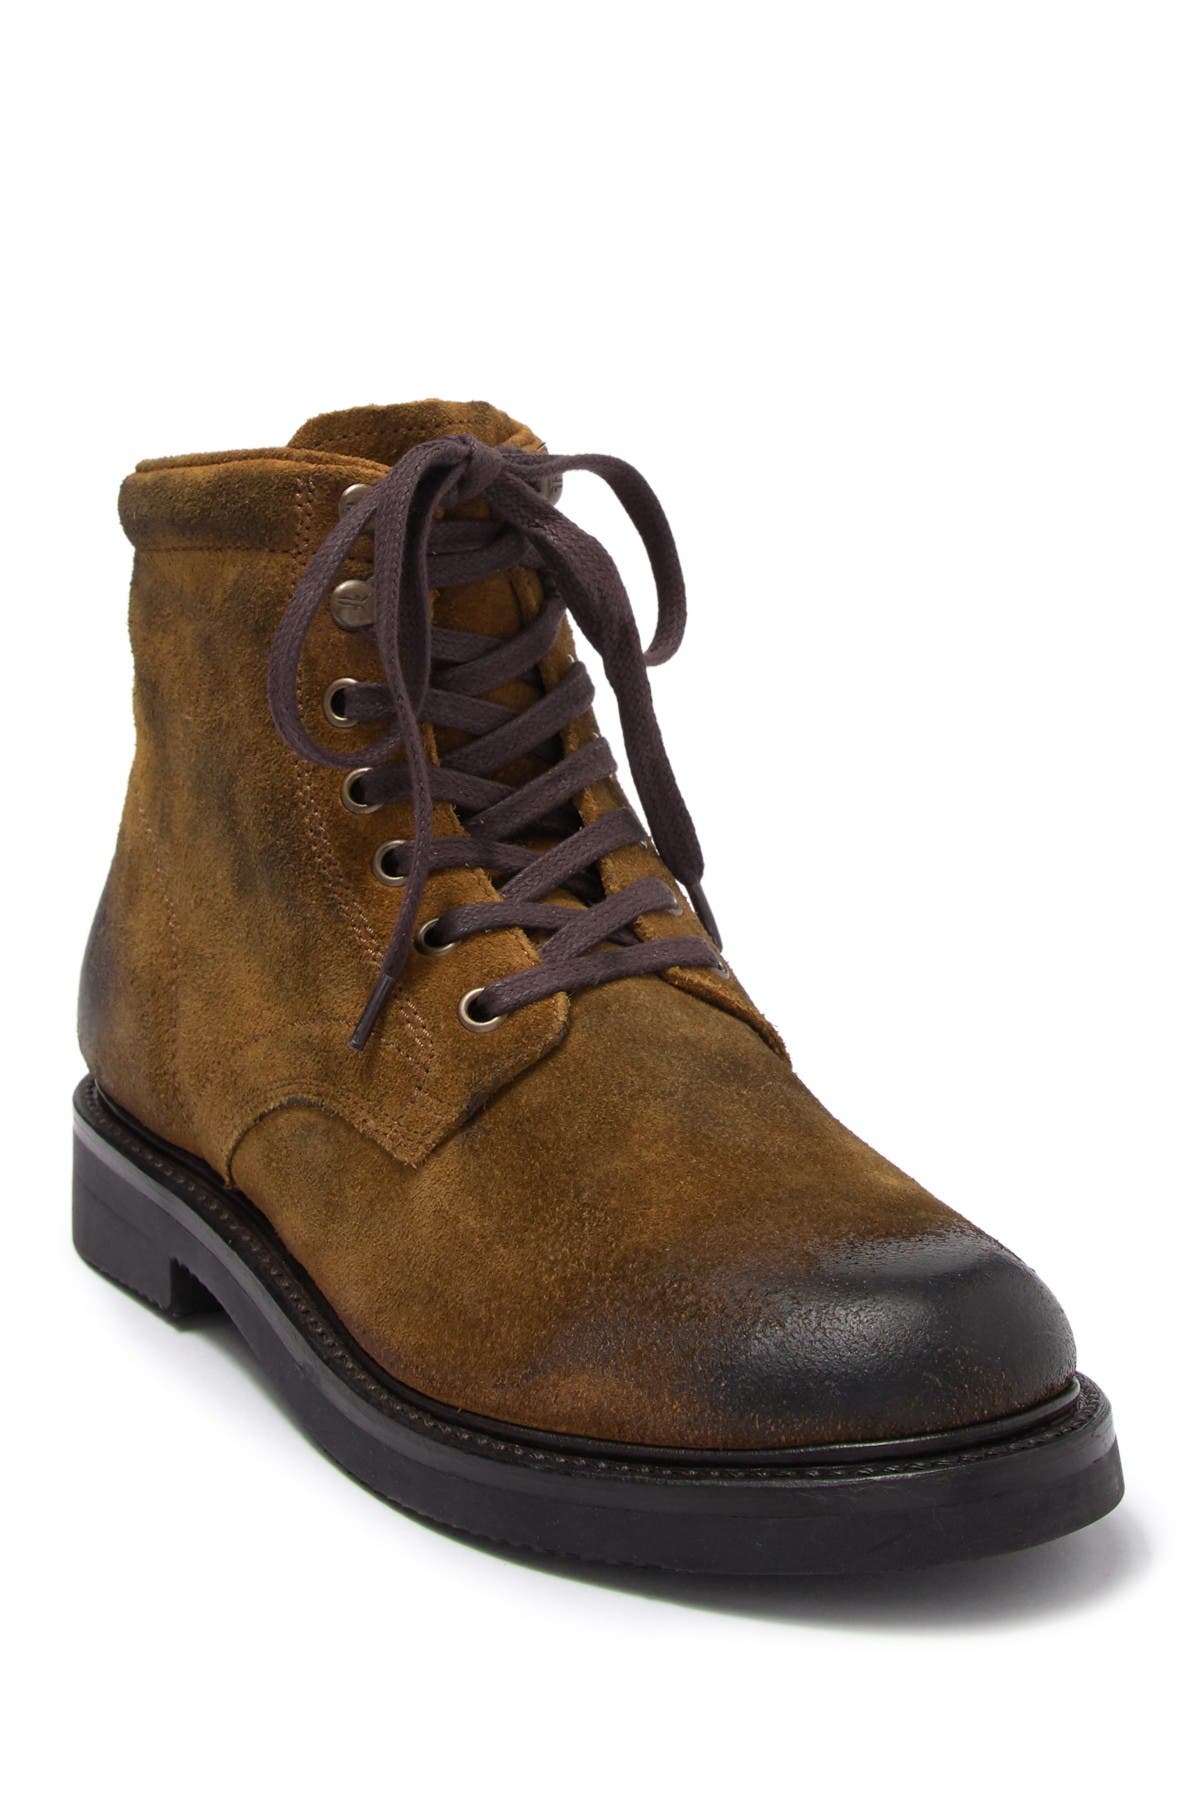 frye logo lace up boots